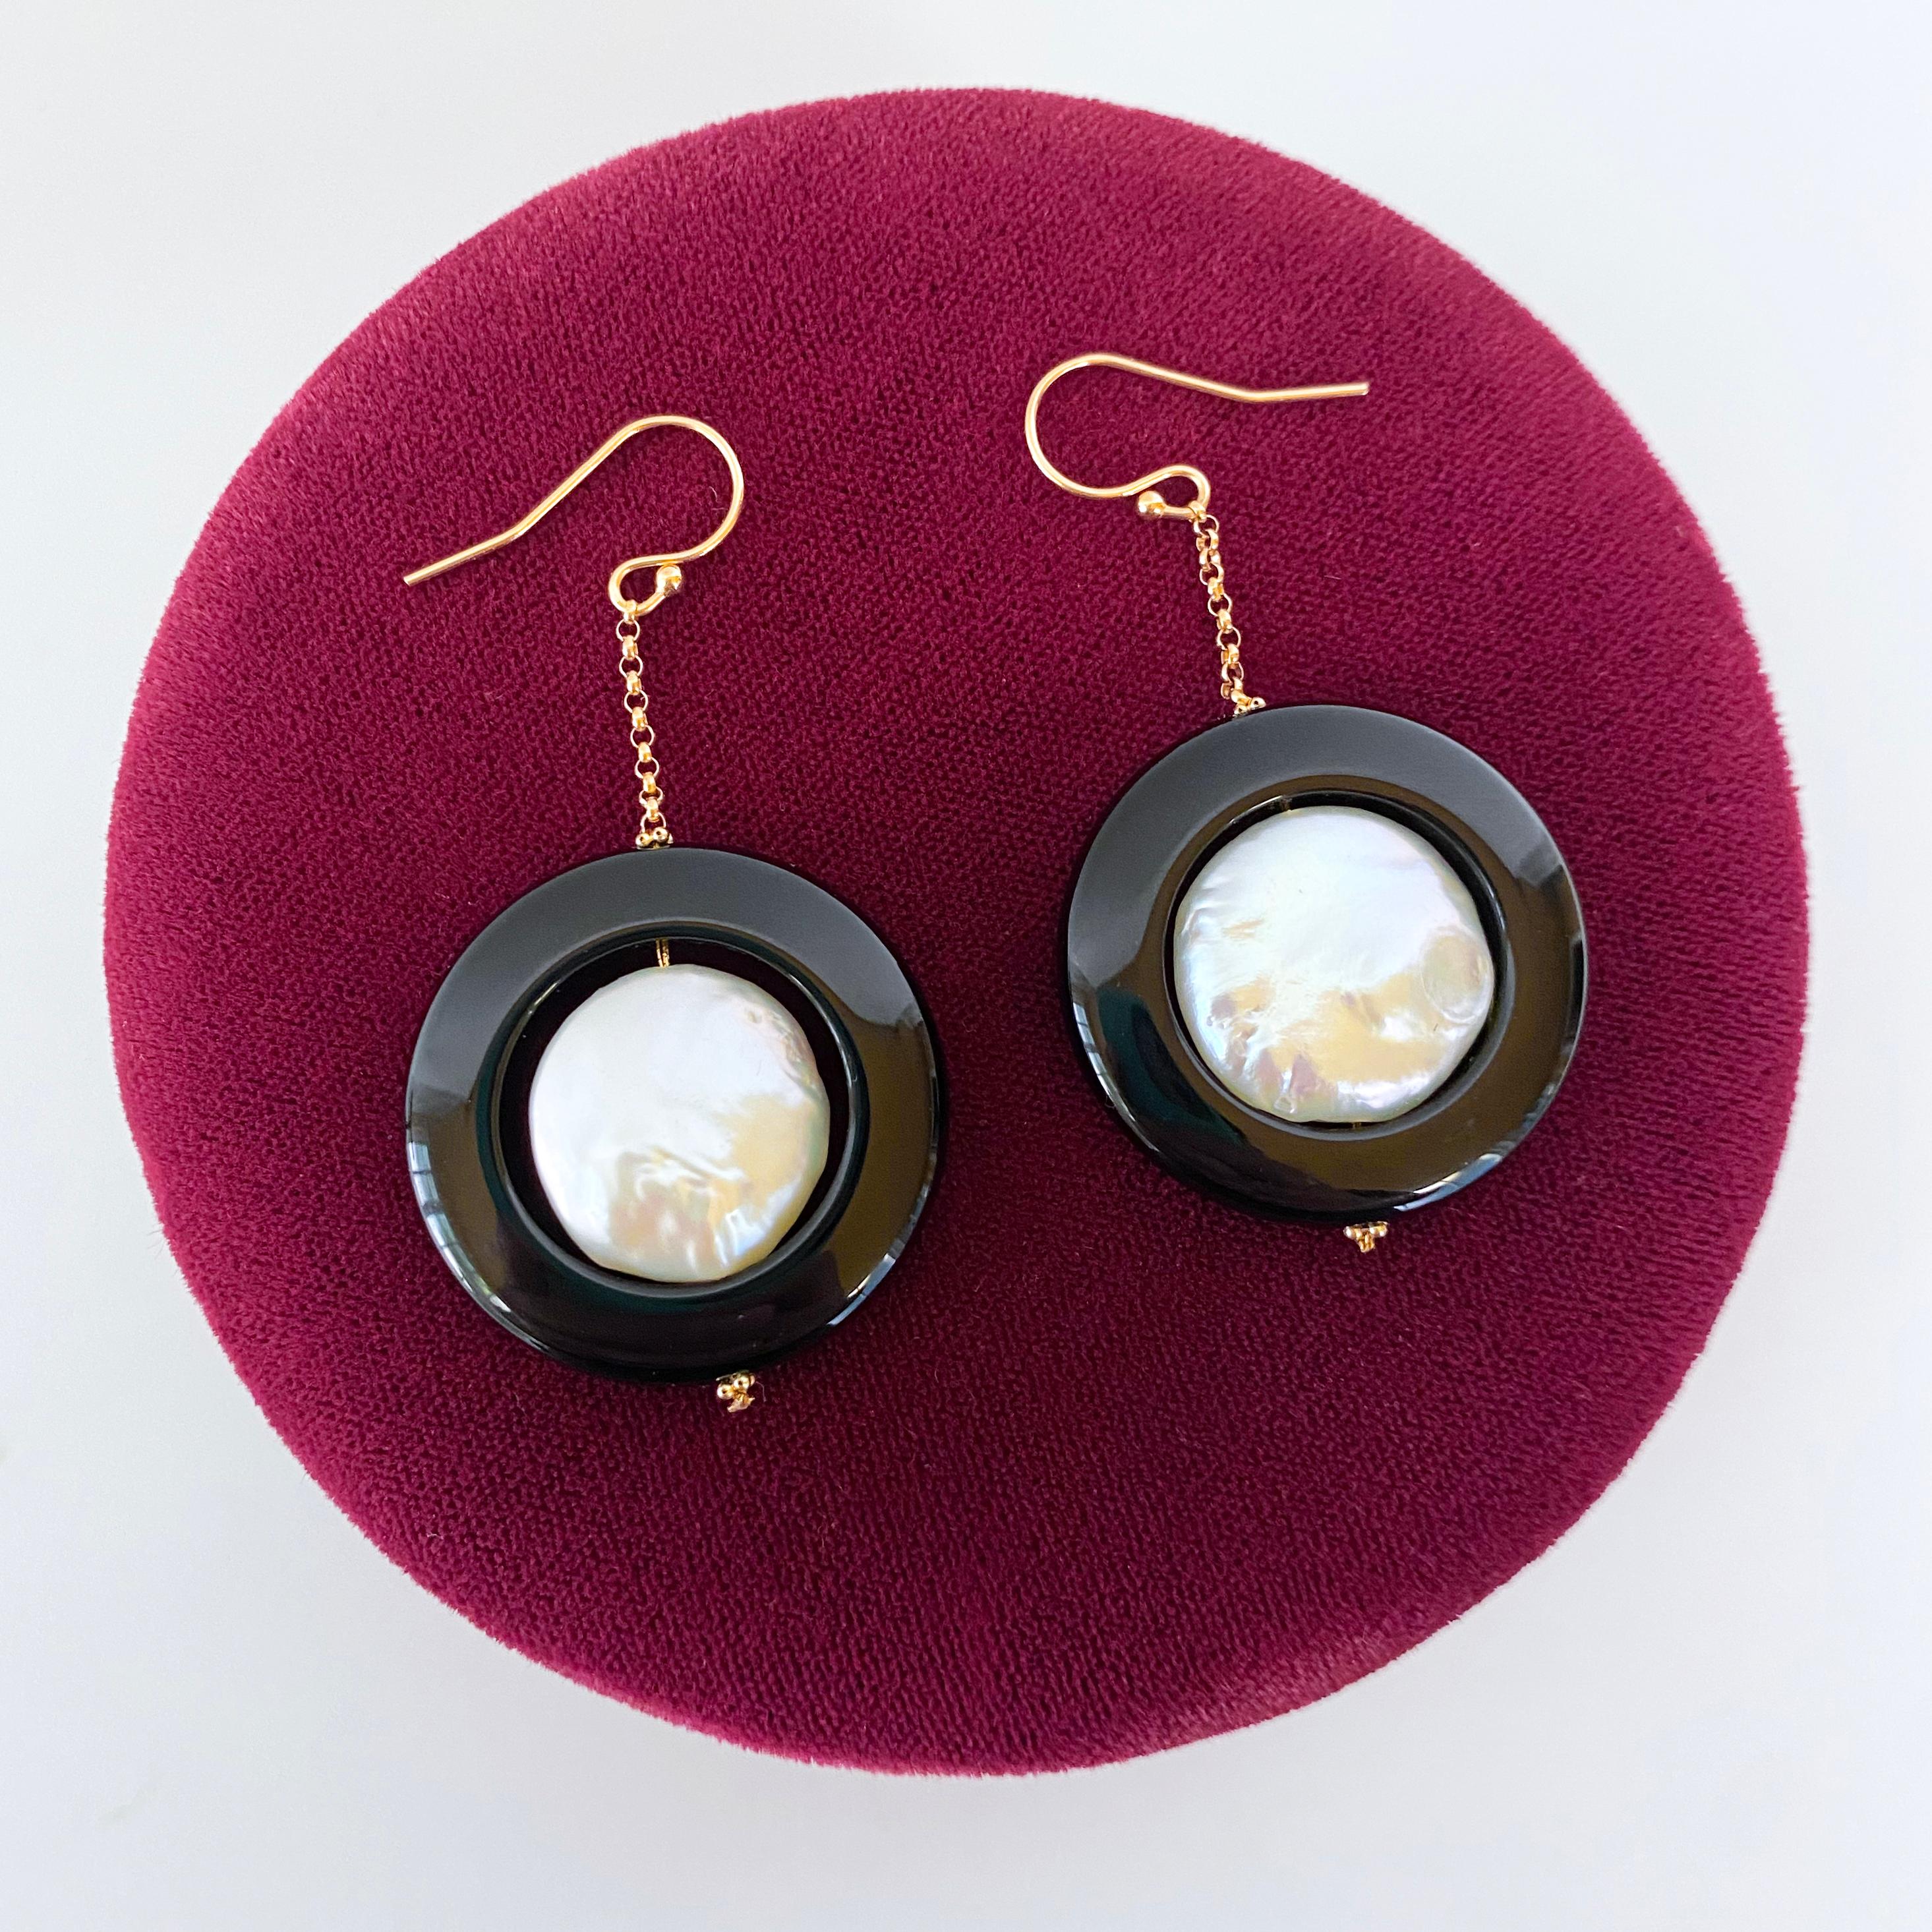 Classic and elegant pair of Earrings by Marina J. This pair features two beautiful Baroque Coin Pearls displaying a multi colored iridescent luster, encapsulated in round Black Onyx. Measuring 2 inches long each, both pairs dangle off solid 14k